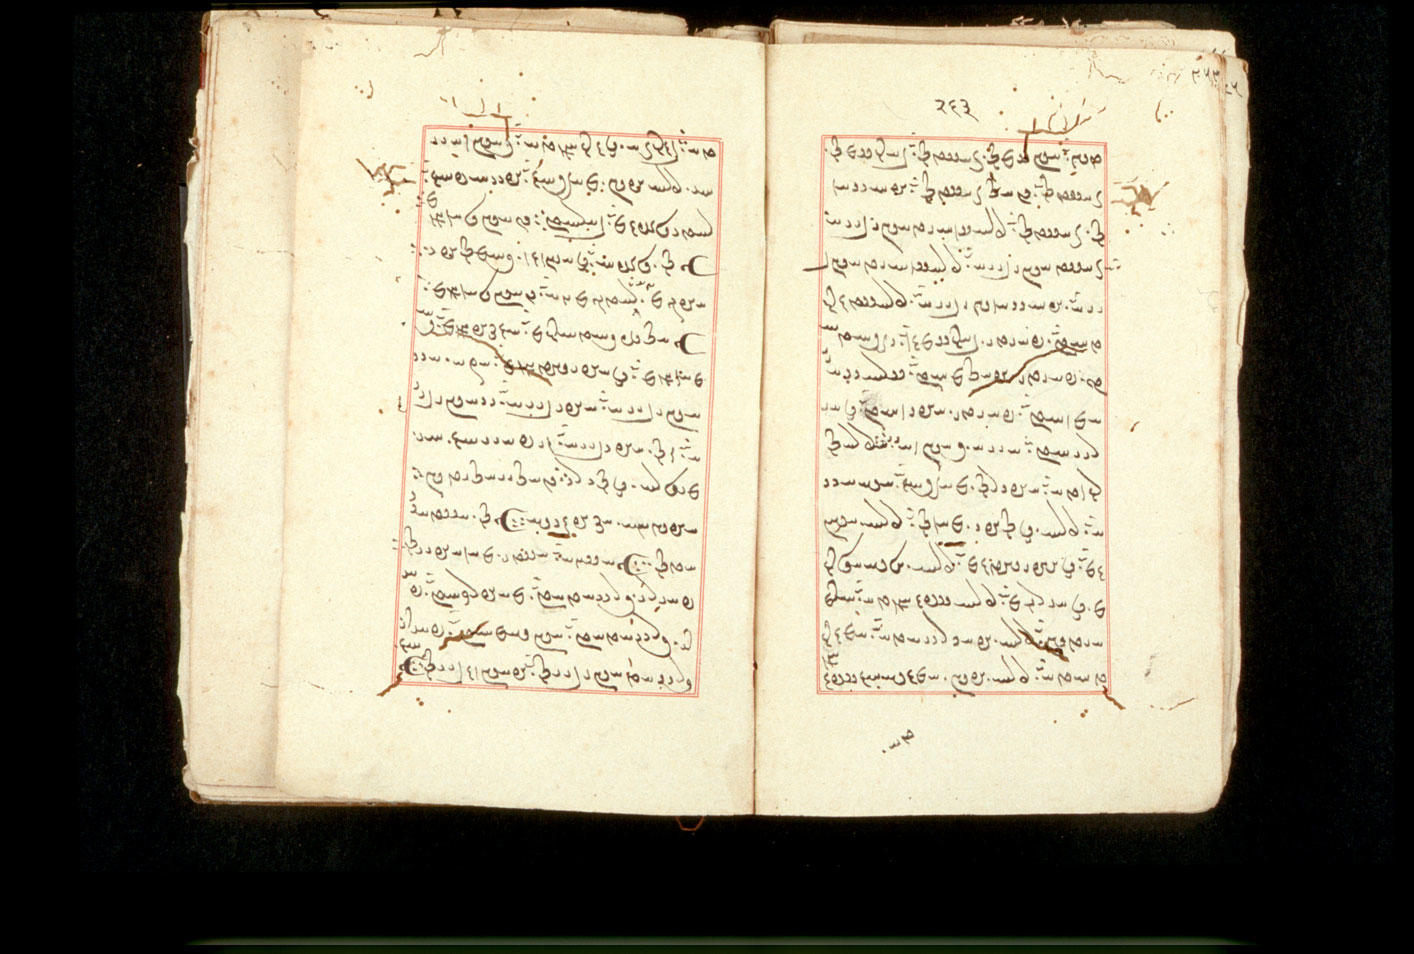 Folios 263v (right) and 264r (left)